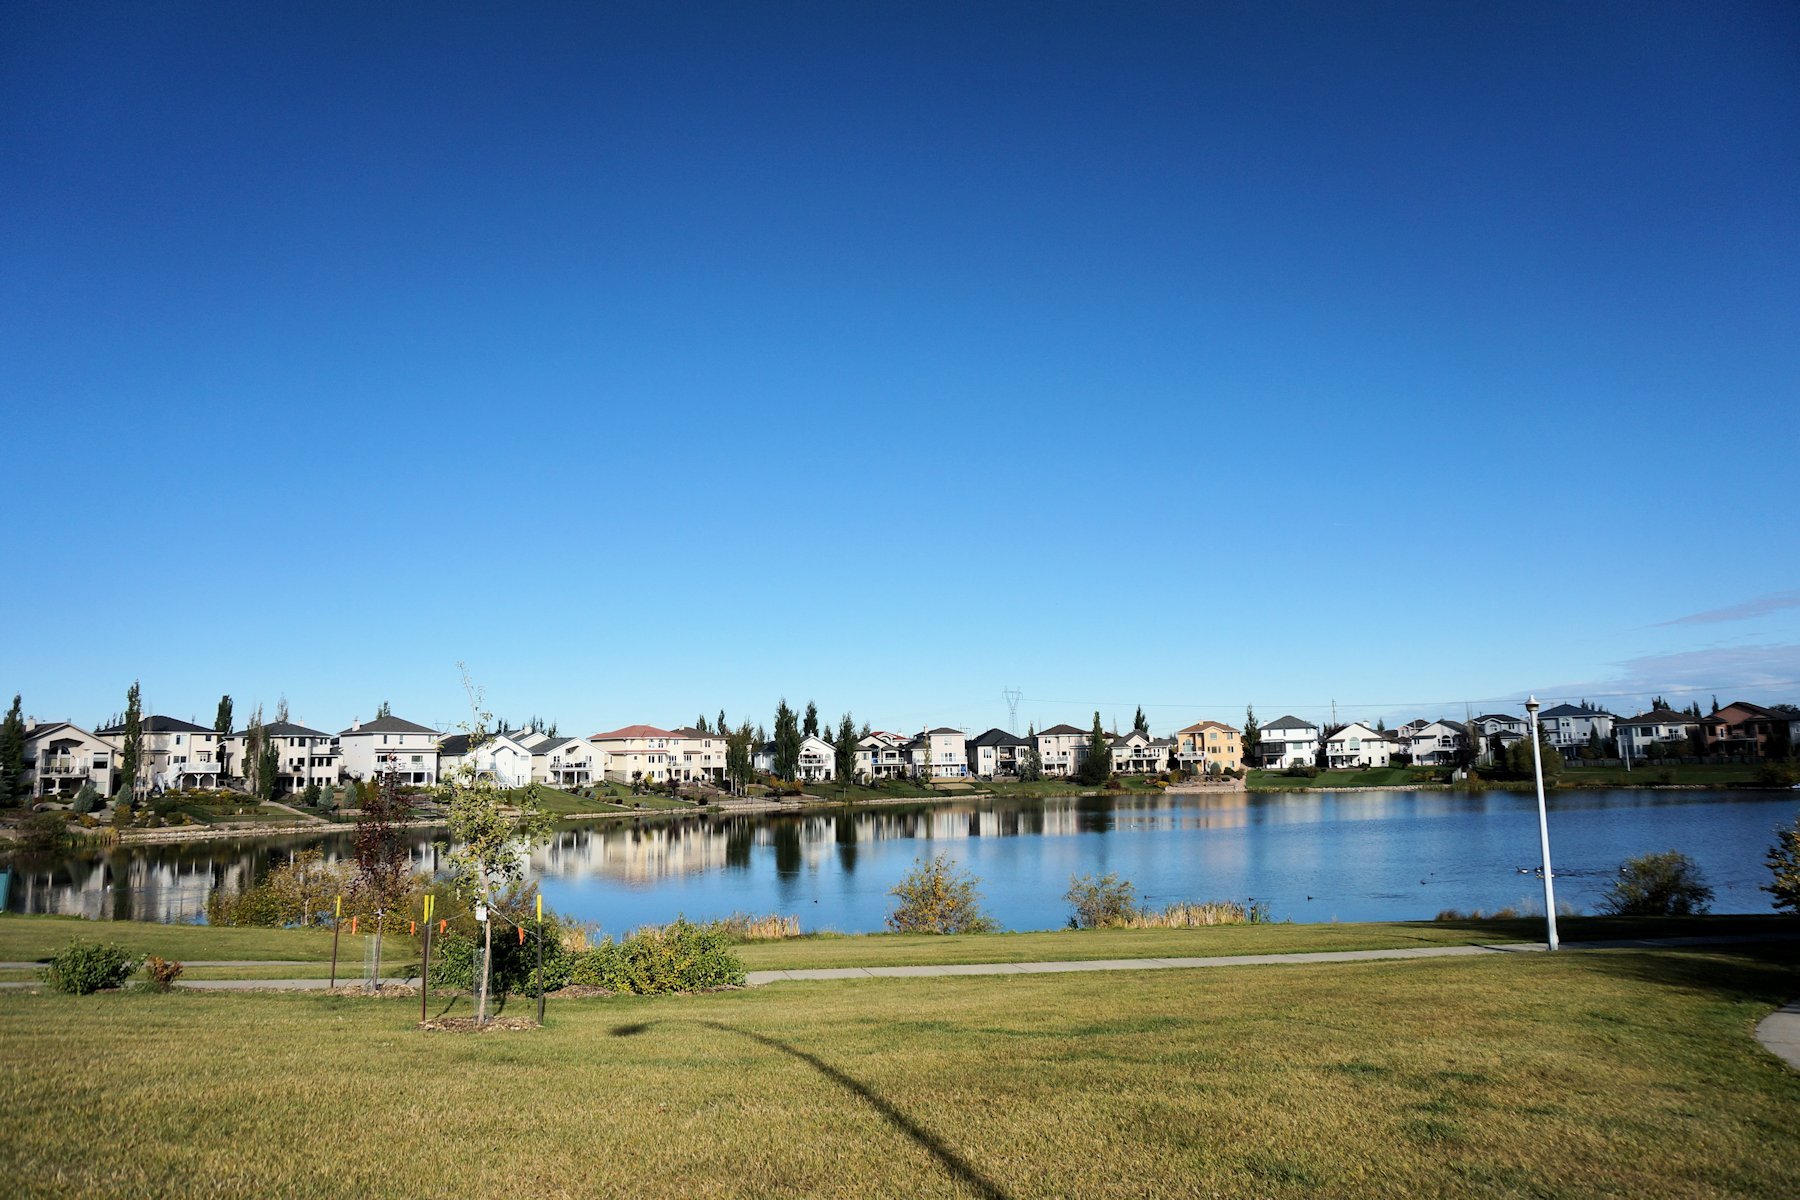 belle rive community in the fall of 2018